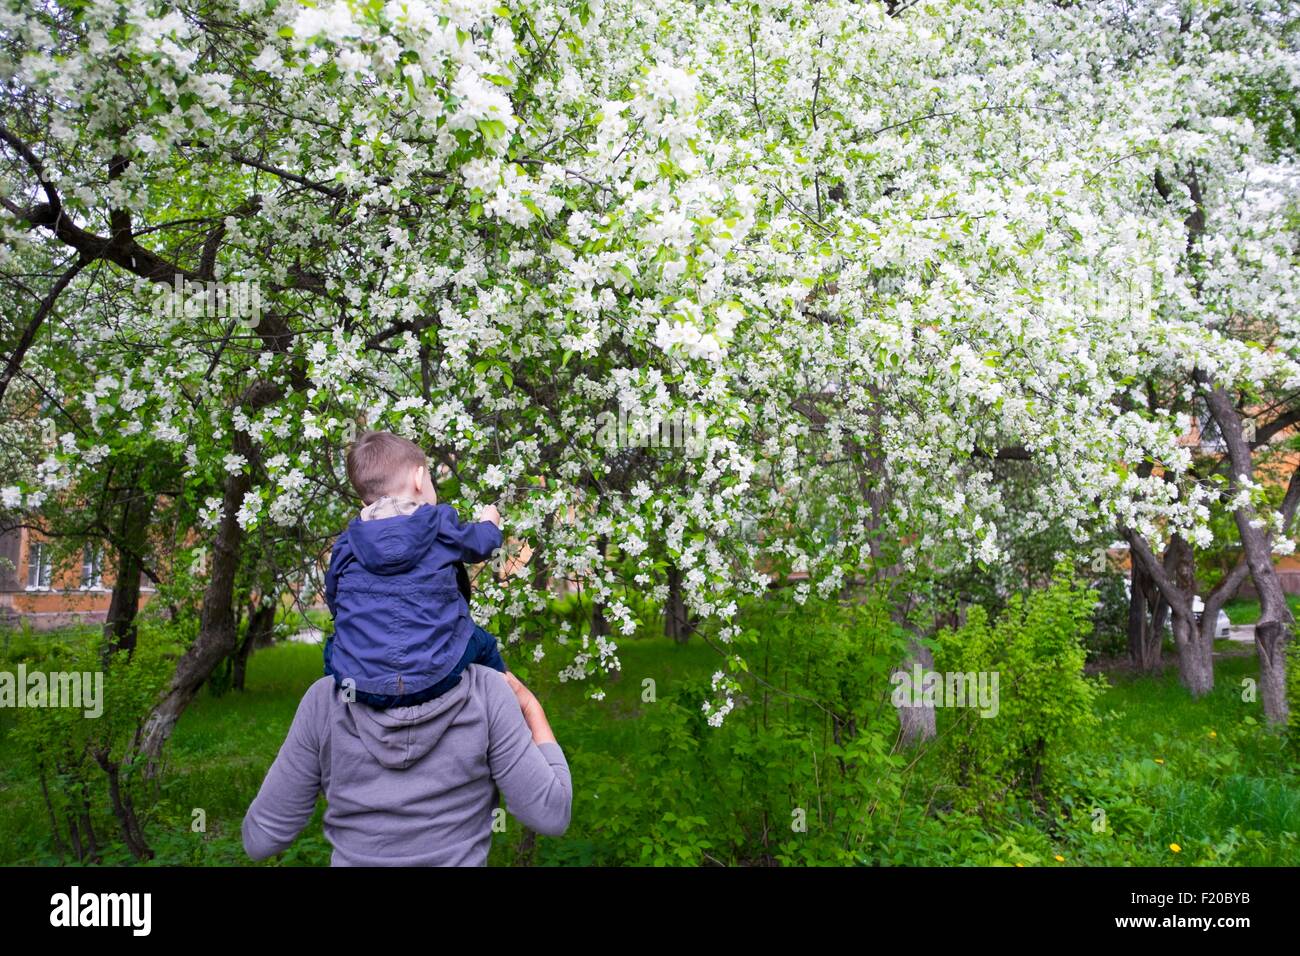 Male toddler sitting on fathers shoulders looking at white orchard blossom Stock Photo